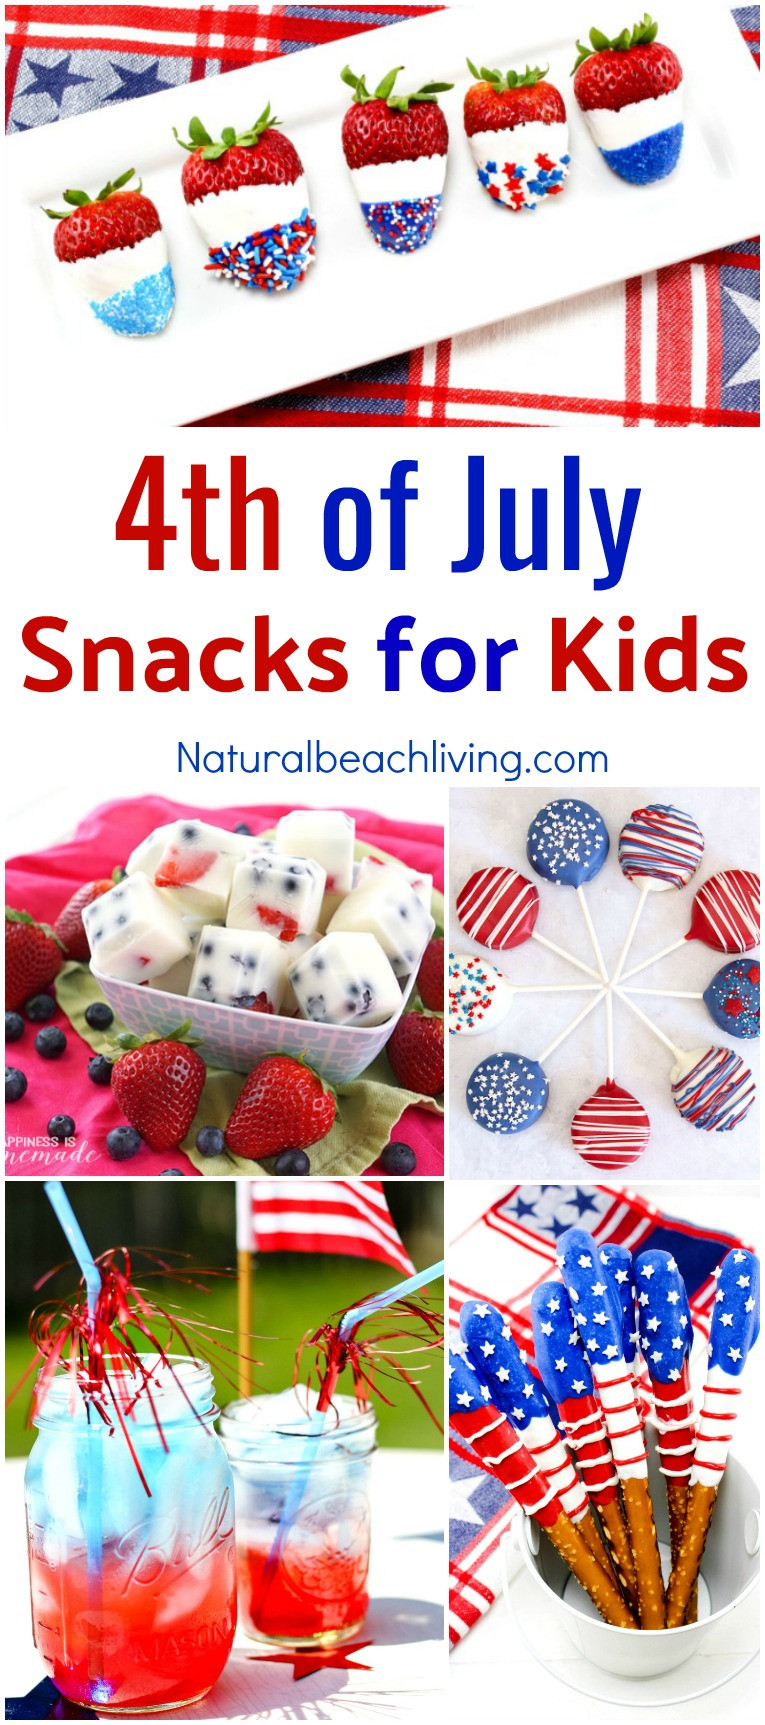 4Th Of July Recipes For Kids
 10 Fourth of July Snacks for Kids Delicious Red White